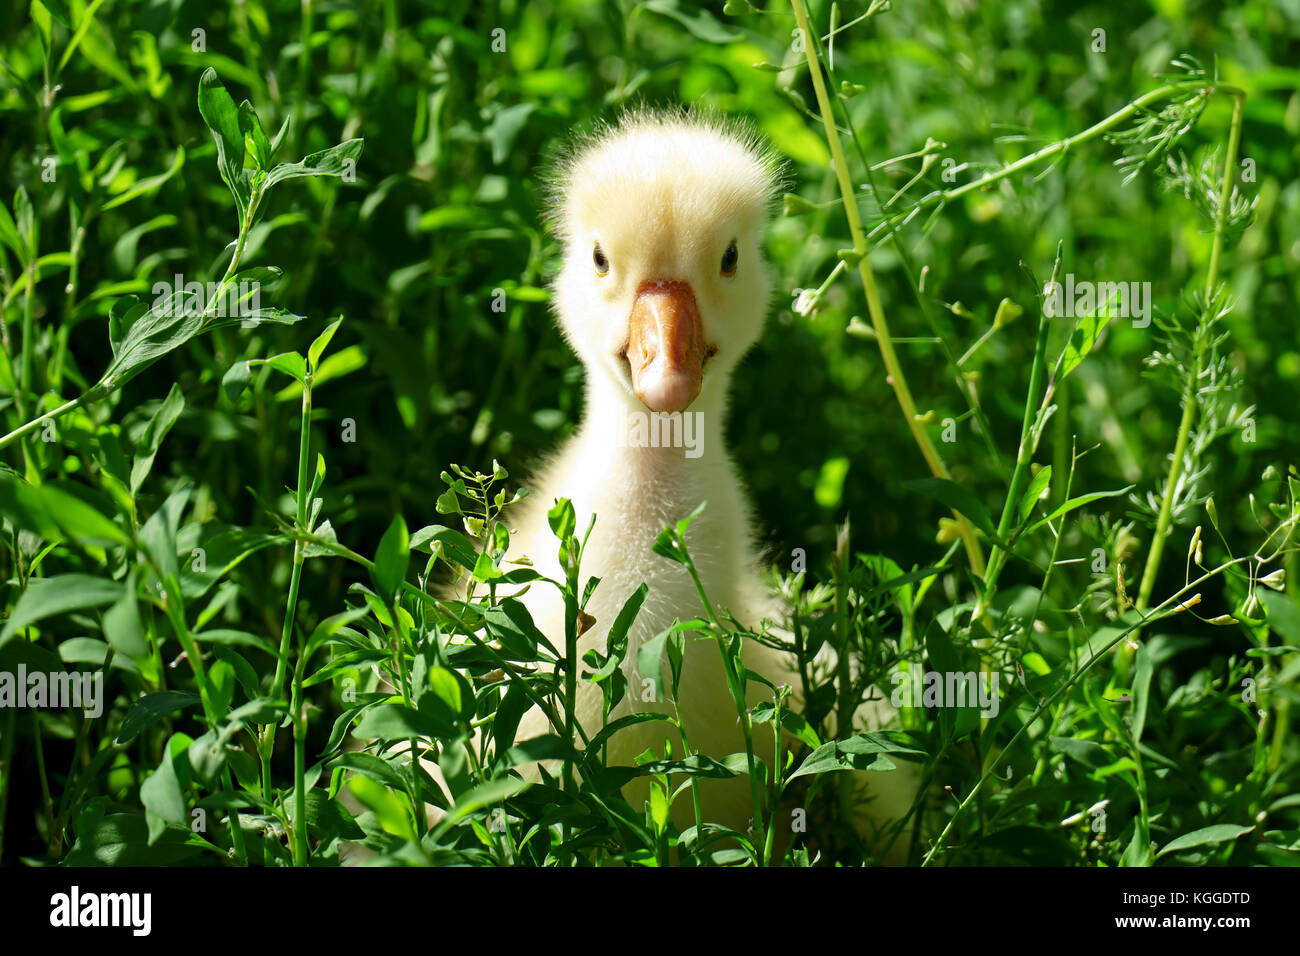 small yellow goose in the green grass on the lawn Stock Photo